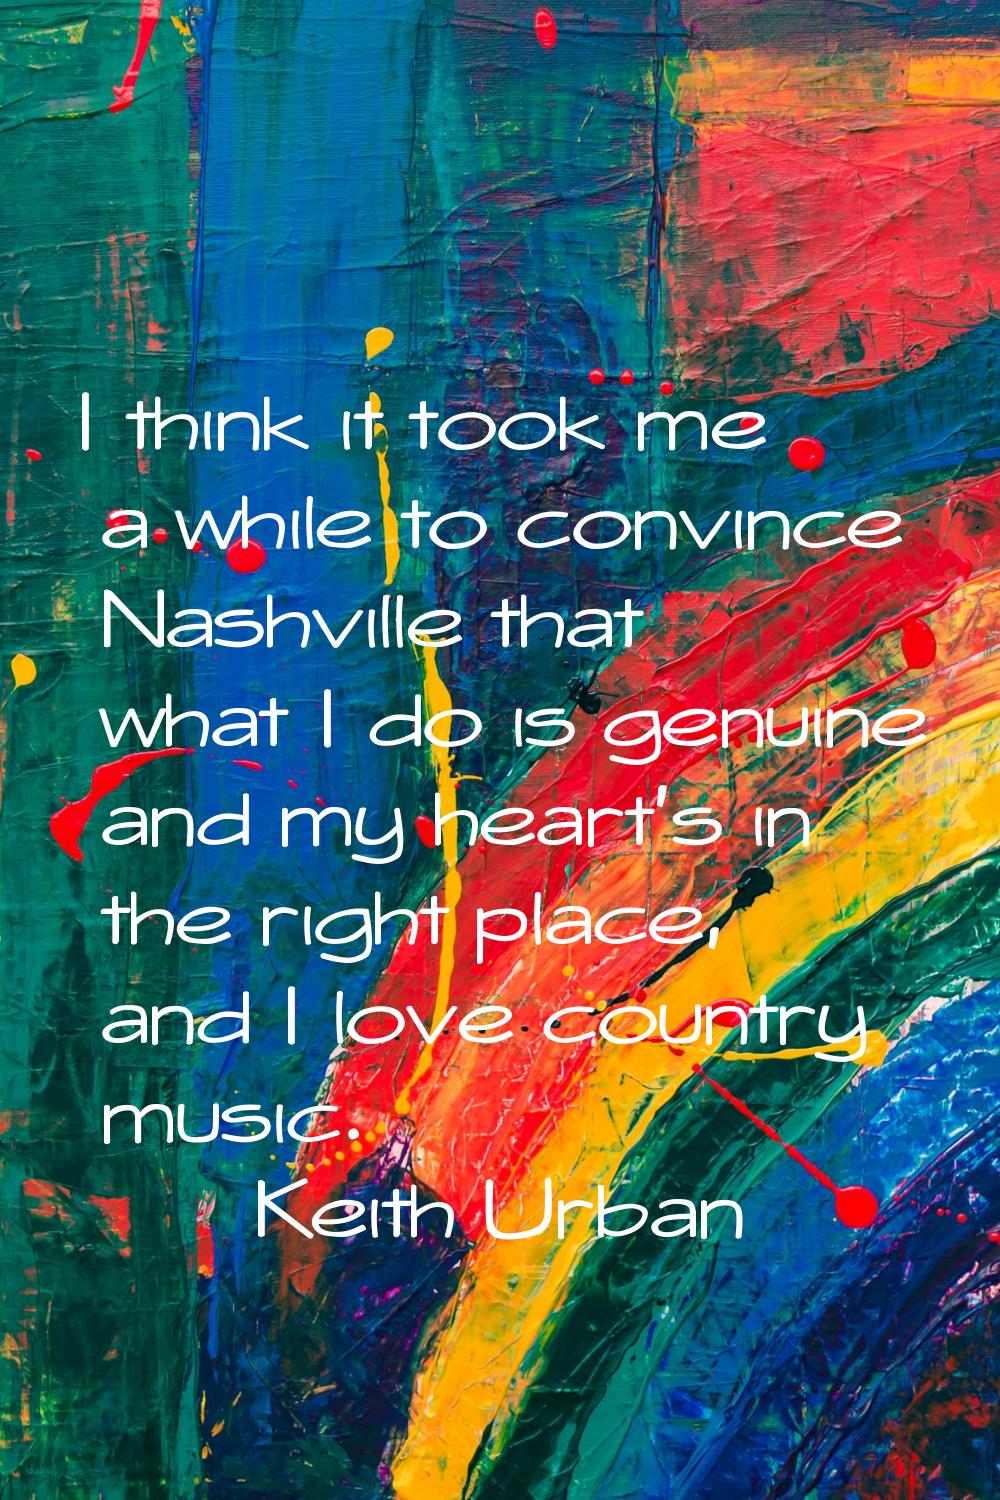 I think it took me a while to convince Nashville that what I do is genuine and my heart's in the ri